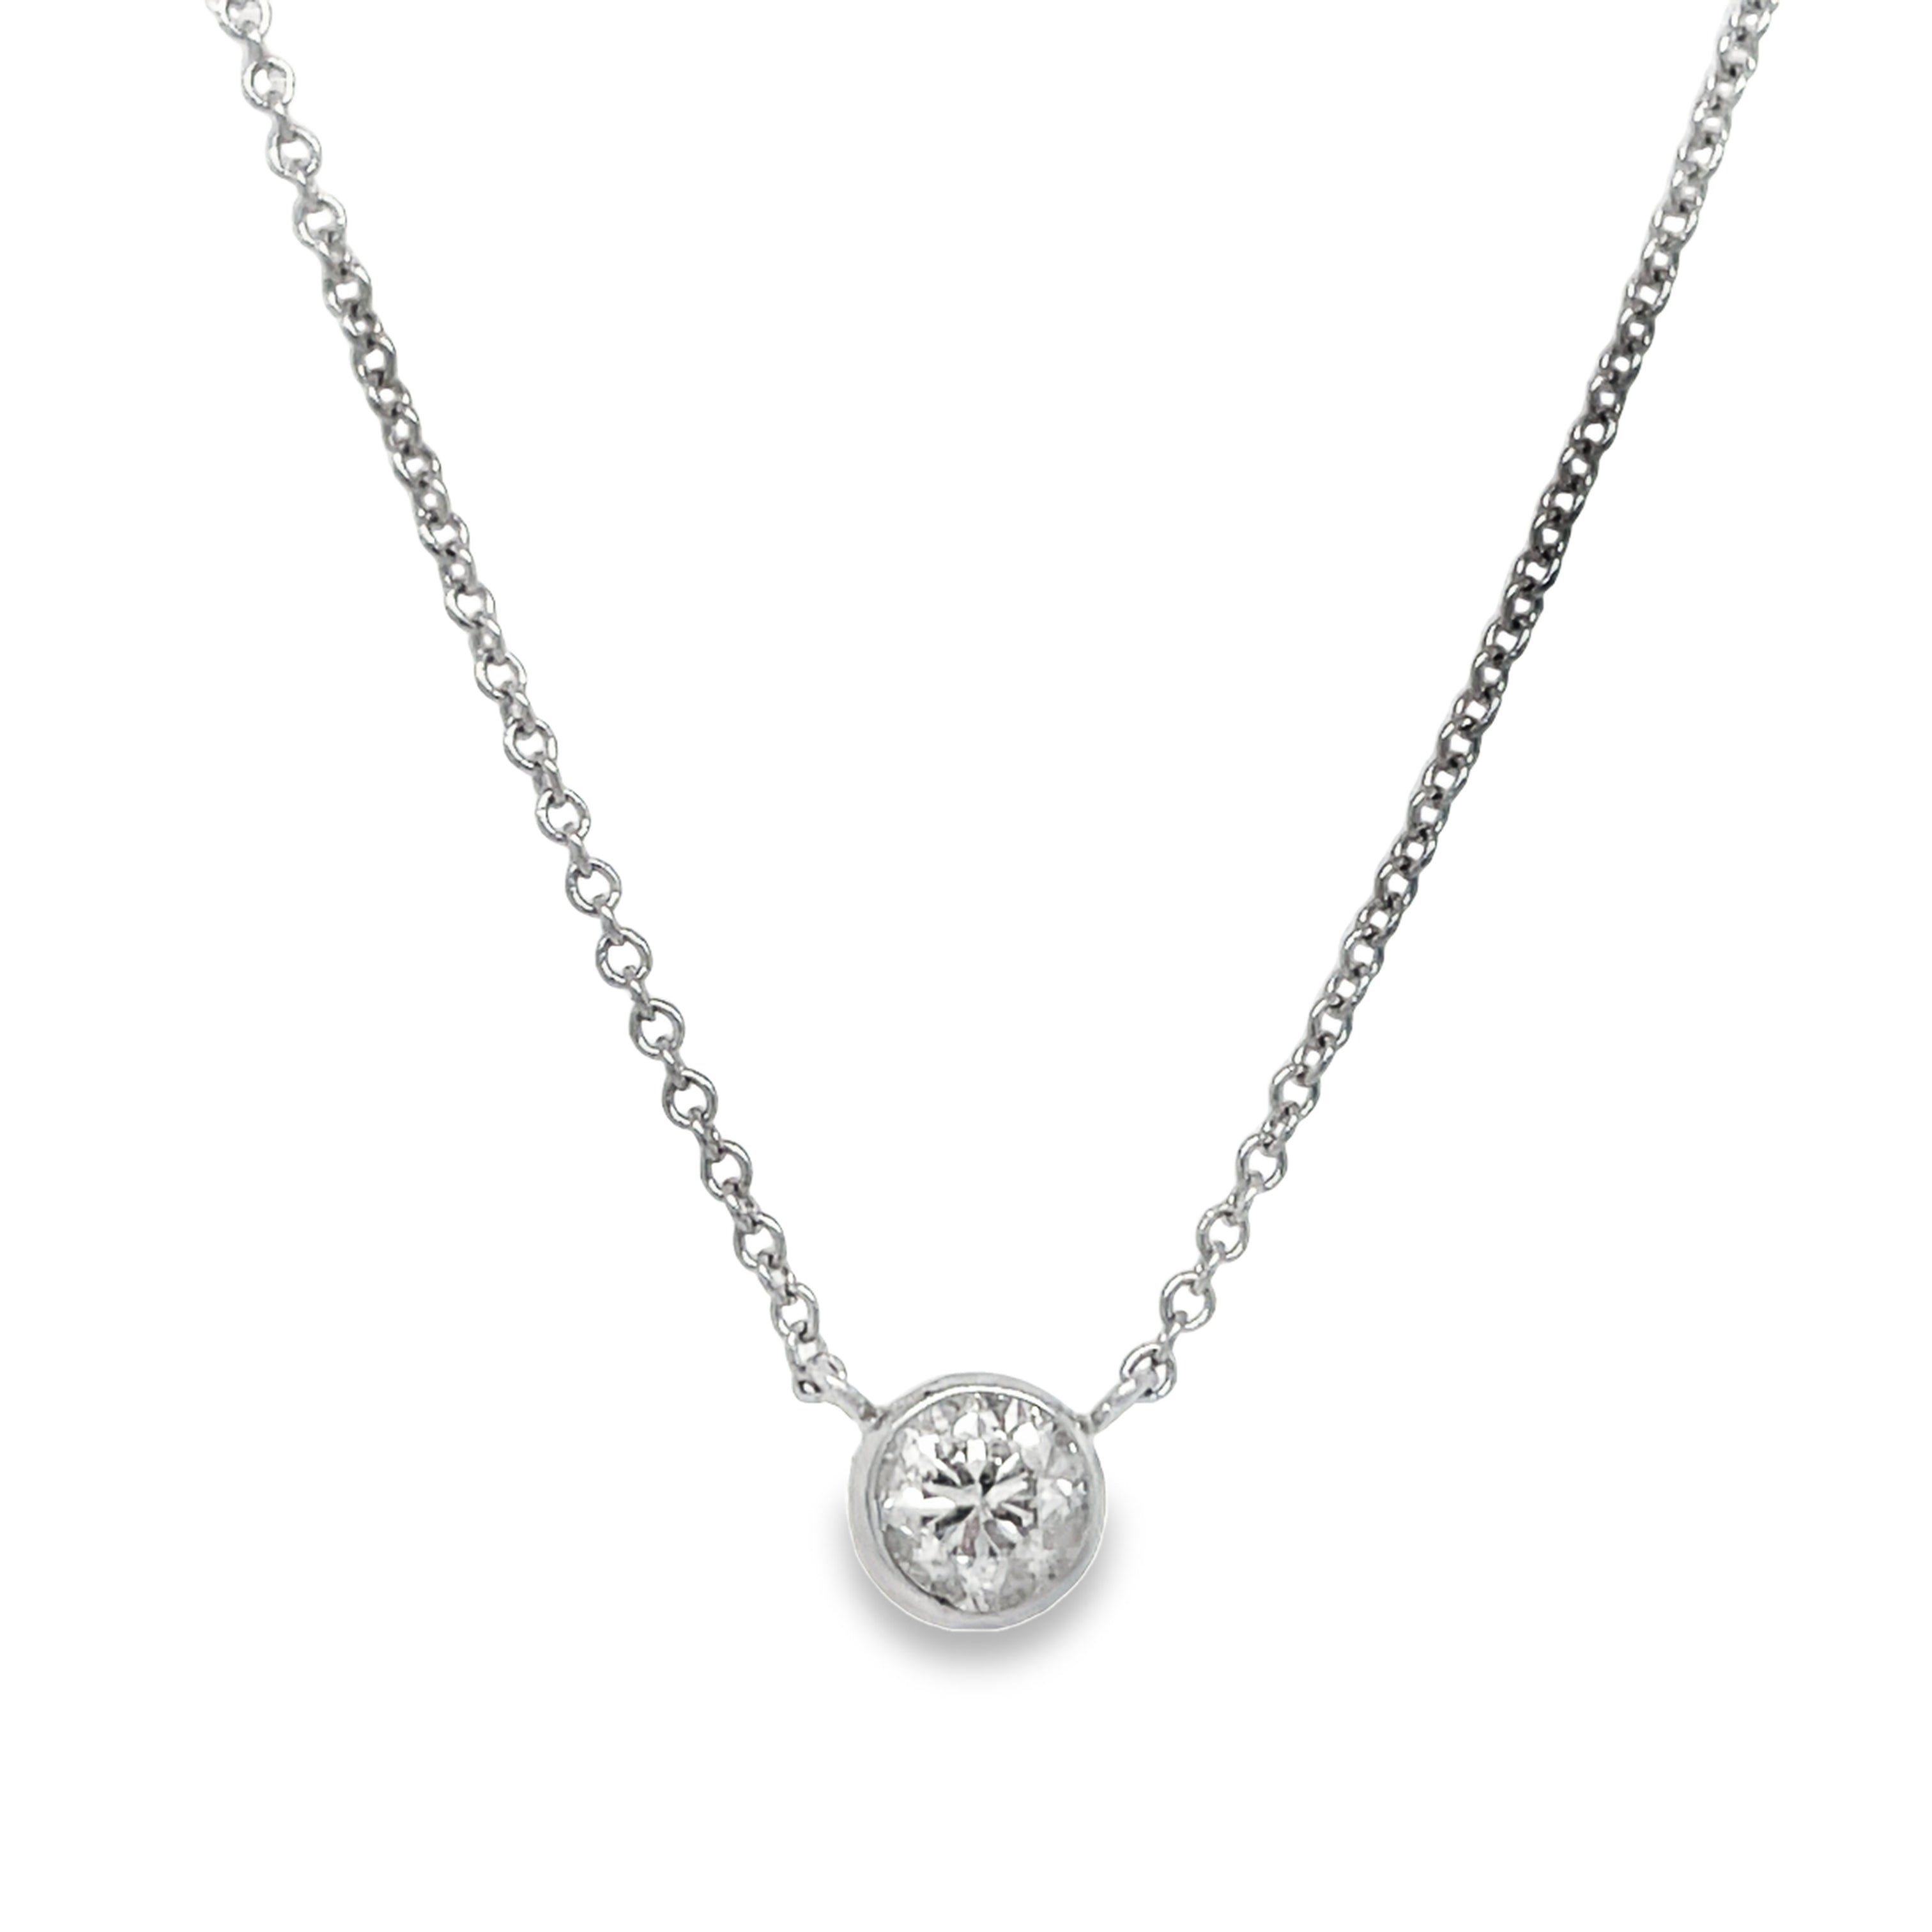 Expertly crafted with a 0.25 carat, round diamond, this 14k white gold pendant necklace is a stunning choice. The diamond is securely bezel-set, ensuring optimal shine and brilliance. In addition, its color grade of H and clarity grade of SI-1 promise a high-quality, sparkling accessory.